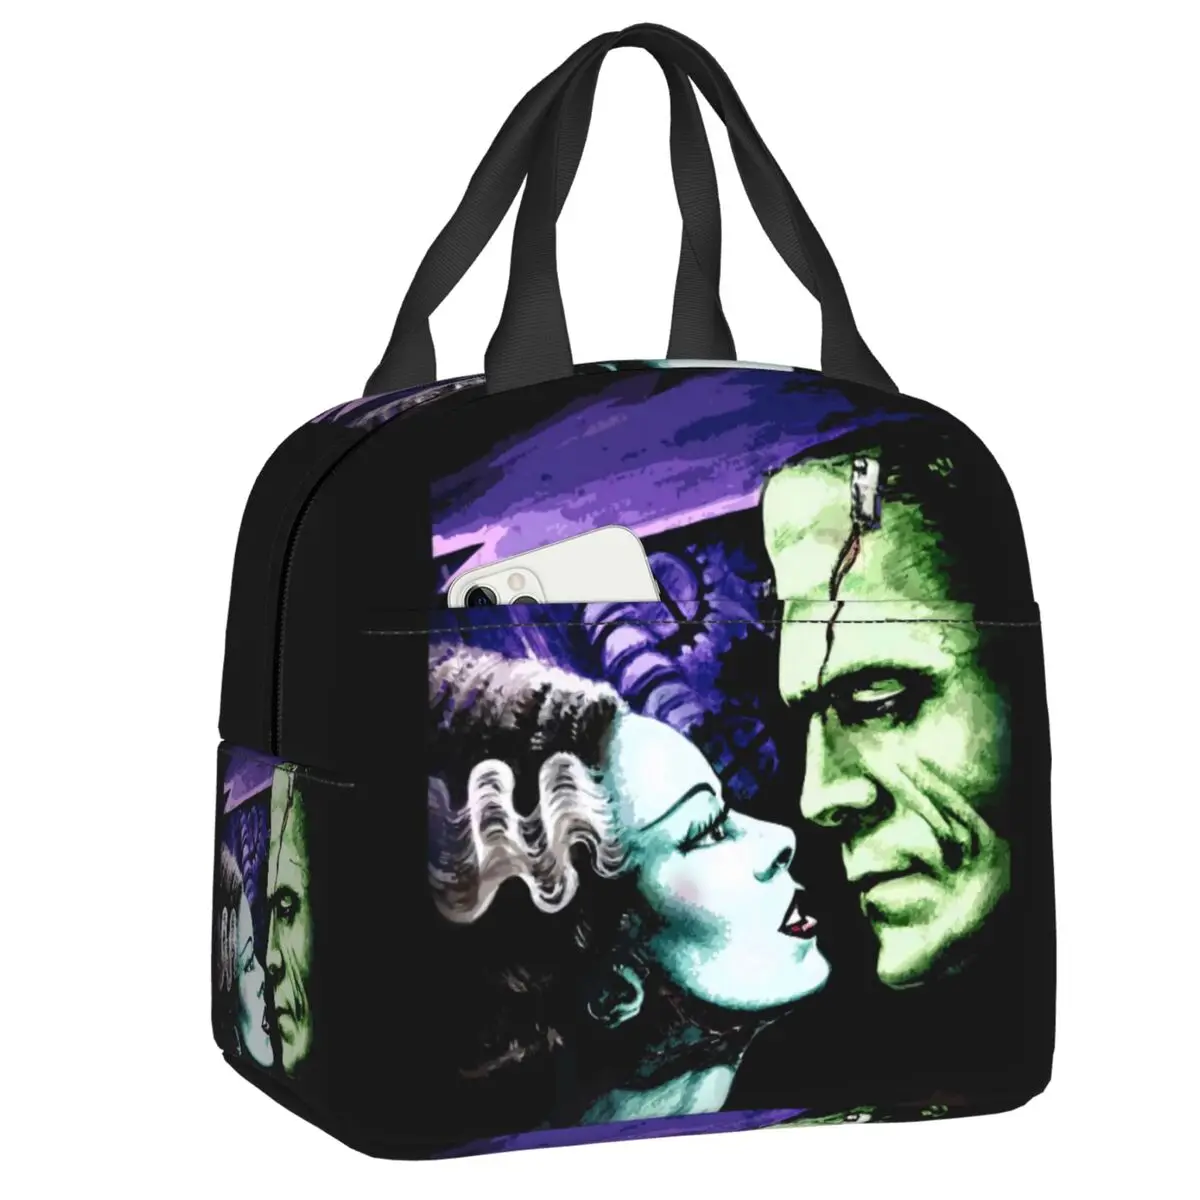 Bride Of Frankenstein Thermal Insulated Lunch Bag Women Horror Film Portable Lunch Container Box for School Picnic Food Bags